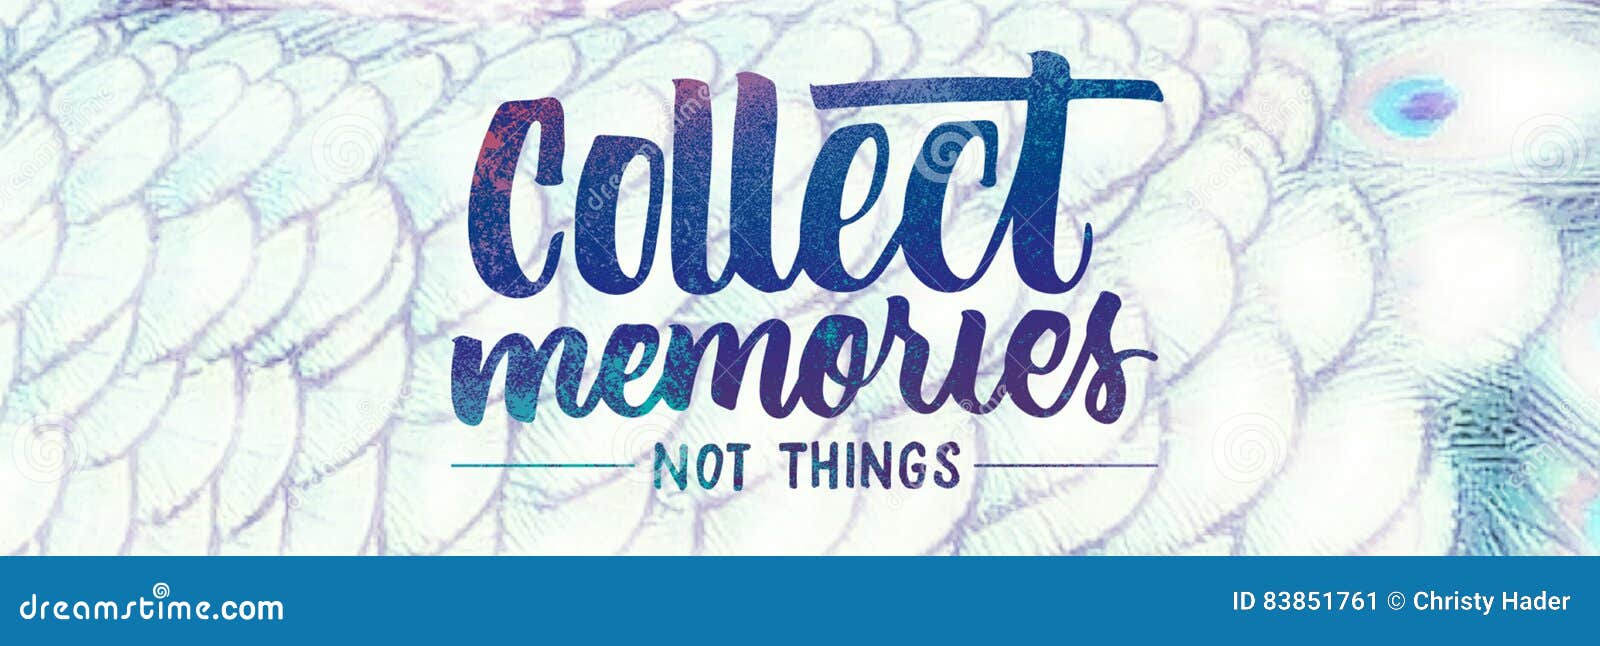 Do you collect things. Collect Memories not things. Collect Memories. Memories are not friends.